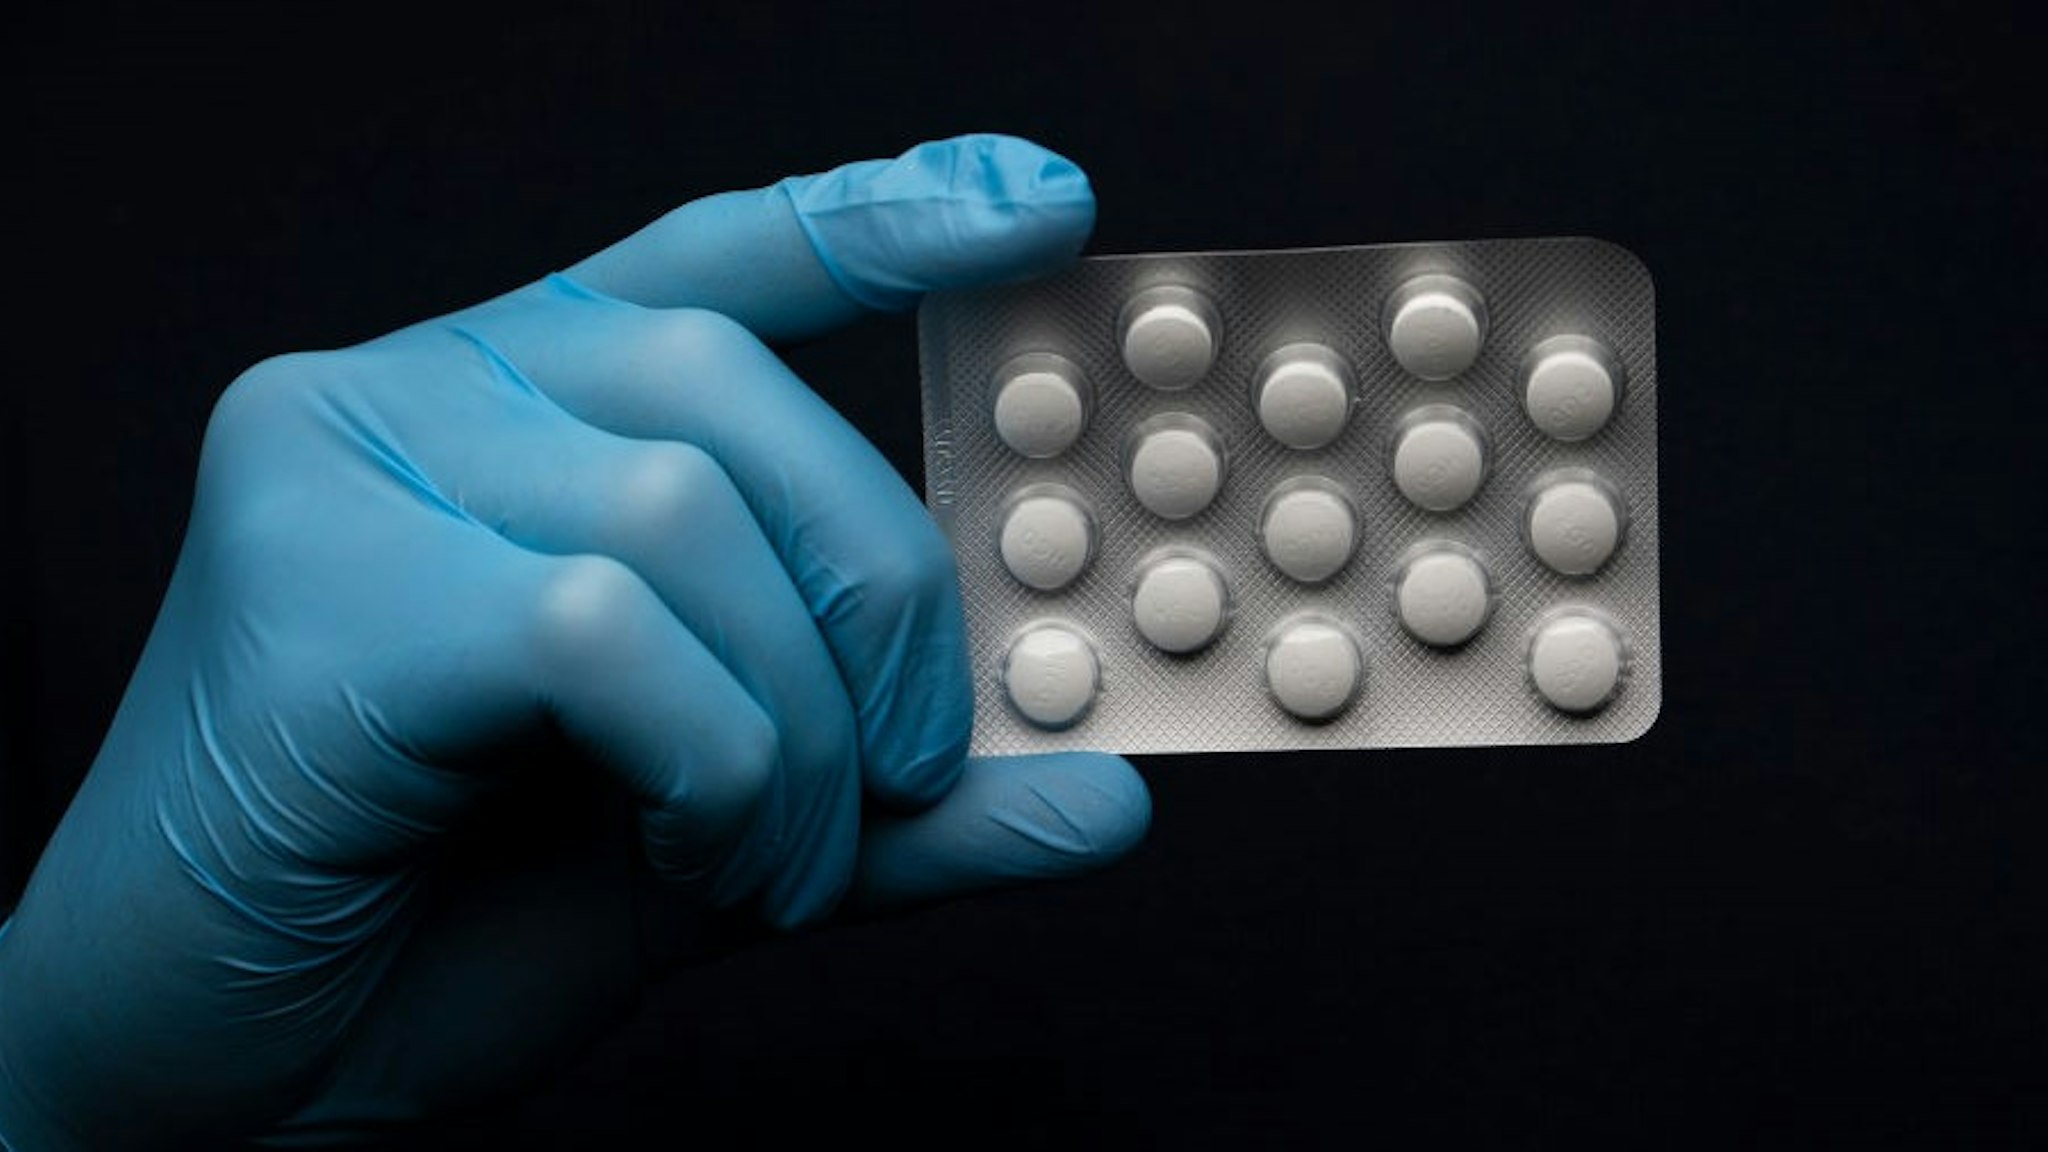 LONDON, UNITED KINGDOM - MARCH 26: In this photo illustration a pack of Hydroxychloroquine Sulfate medication is held up on March 26, 2020 in London, United Kingdom. The Coronavirus (COVID-19) pandemic has spread to many countries across the world, claiming over 20,000 lives and infecting hundreds of thousands more. U.S. President Donald Trump recently promoted Hydroxychloroquine, a common anti-malaria drug, as a potential treatment for COVID-19 when combined with the antibiotic azithromycin. “HYDROXYCHLOROQUINE &amp; AZITHROMYCIN, taken together, have a real chance to be one of the biggest game changers in the history of medicine,” President Trump tweeted last week. (Photo by